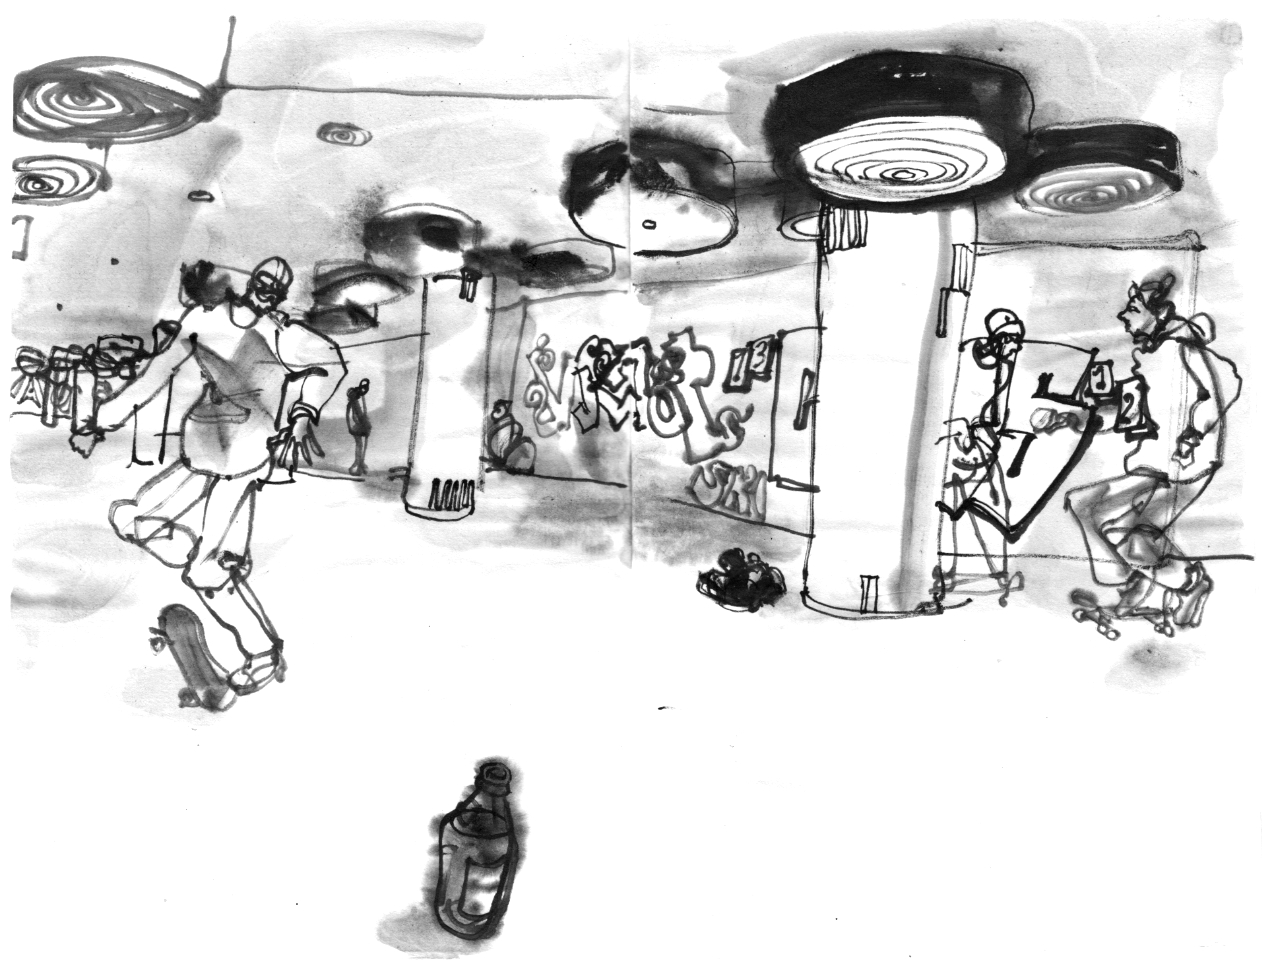 Ink drawing of skateboarders in an underground passway, beer bottle in front